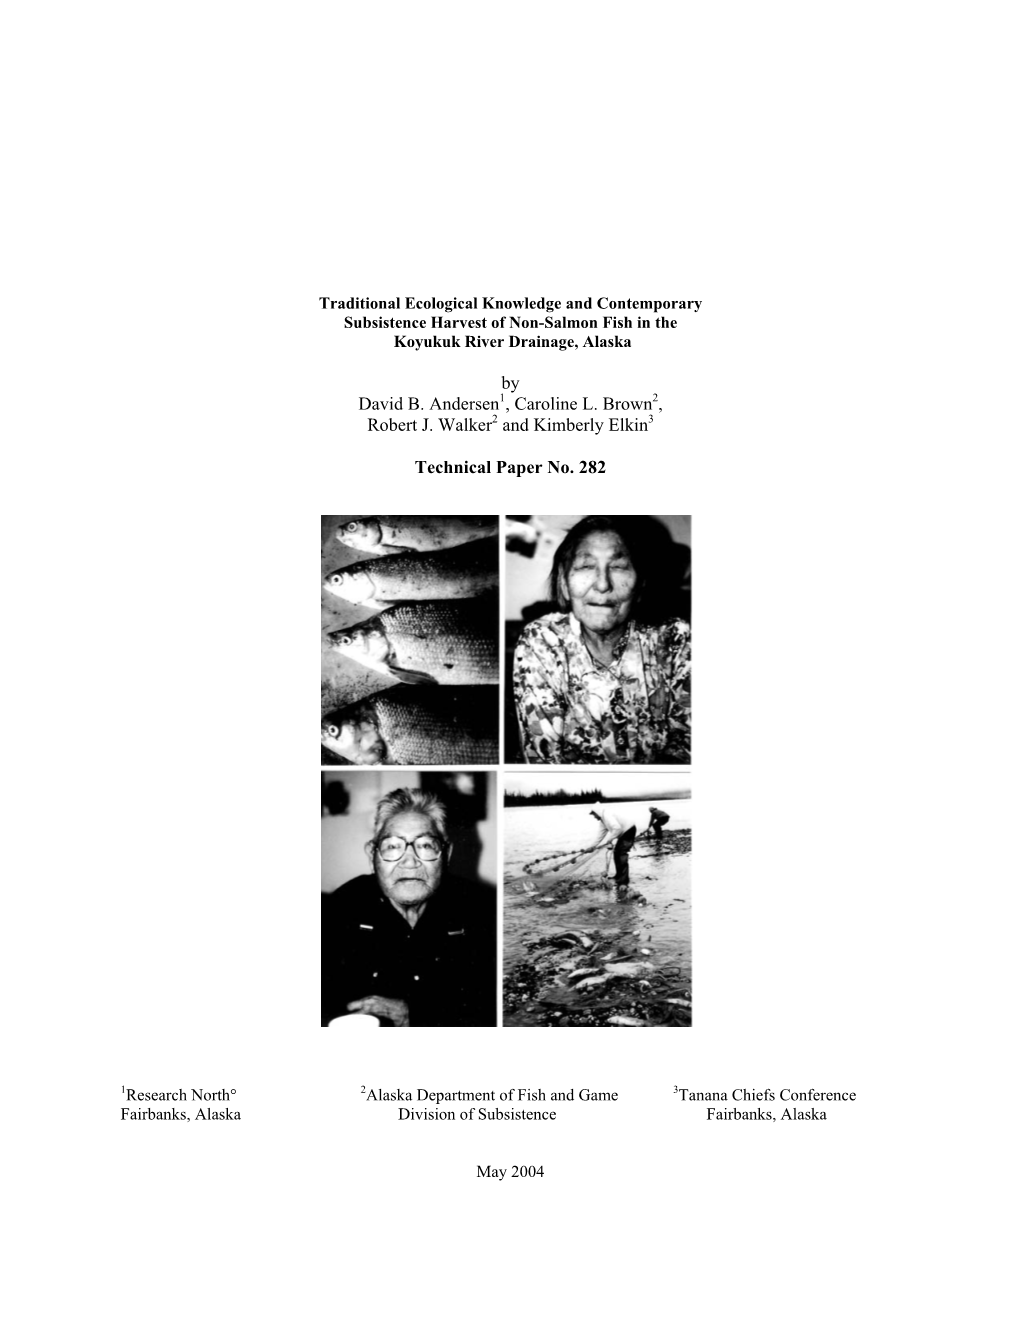 Traditional Ecological Knowledge and Contemporary Subsistence Harvest of Non-Salmon Fish in the Koyukuk River Drainage, Alaska